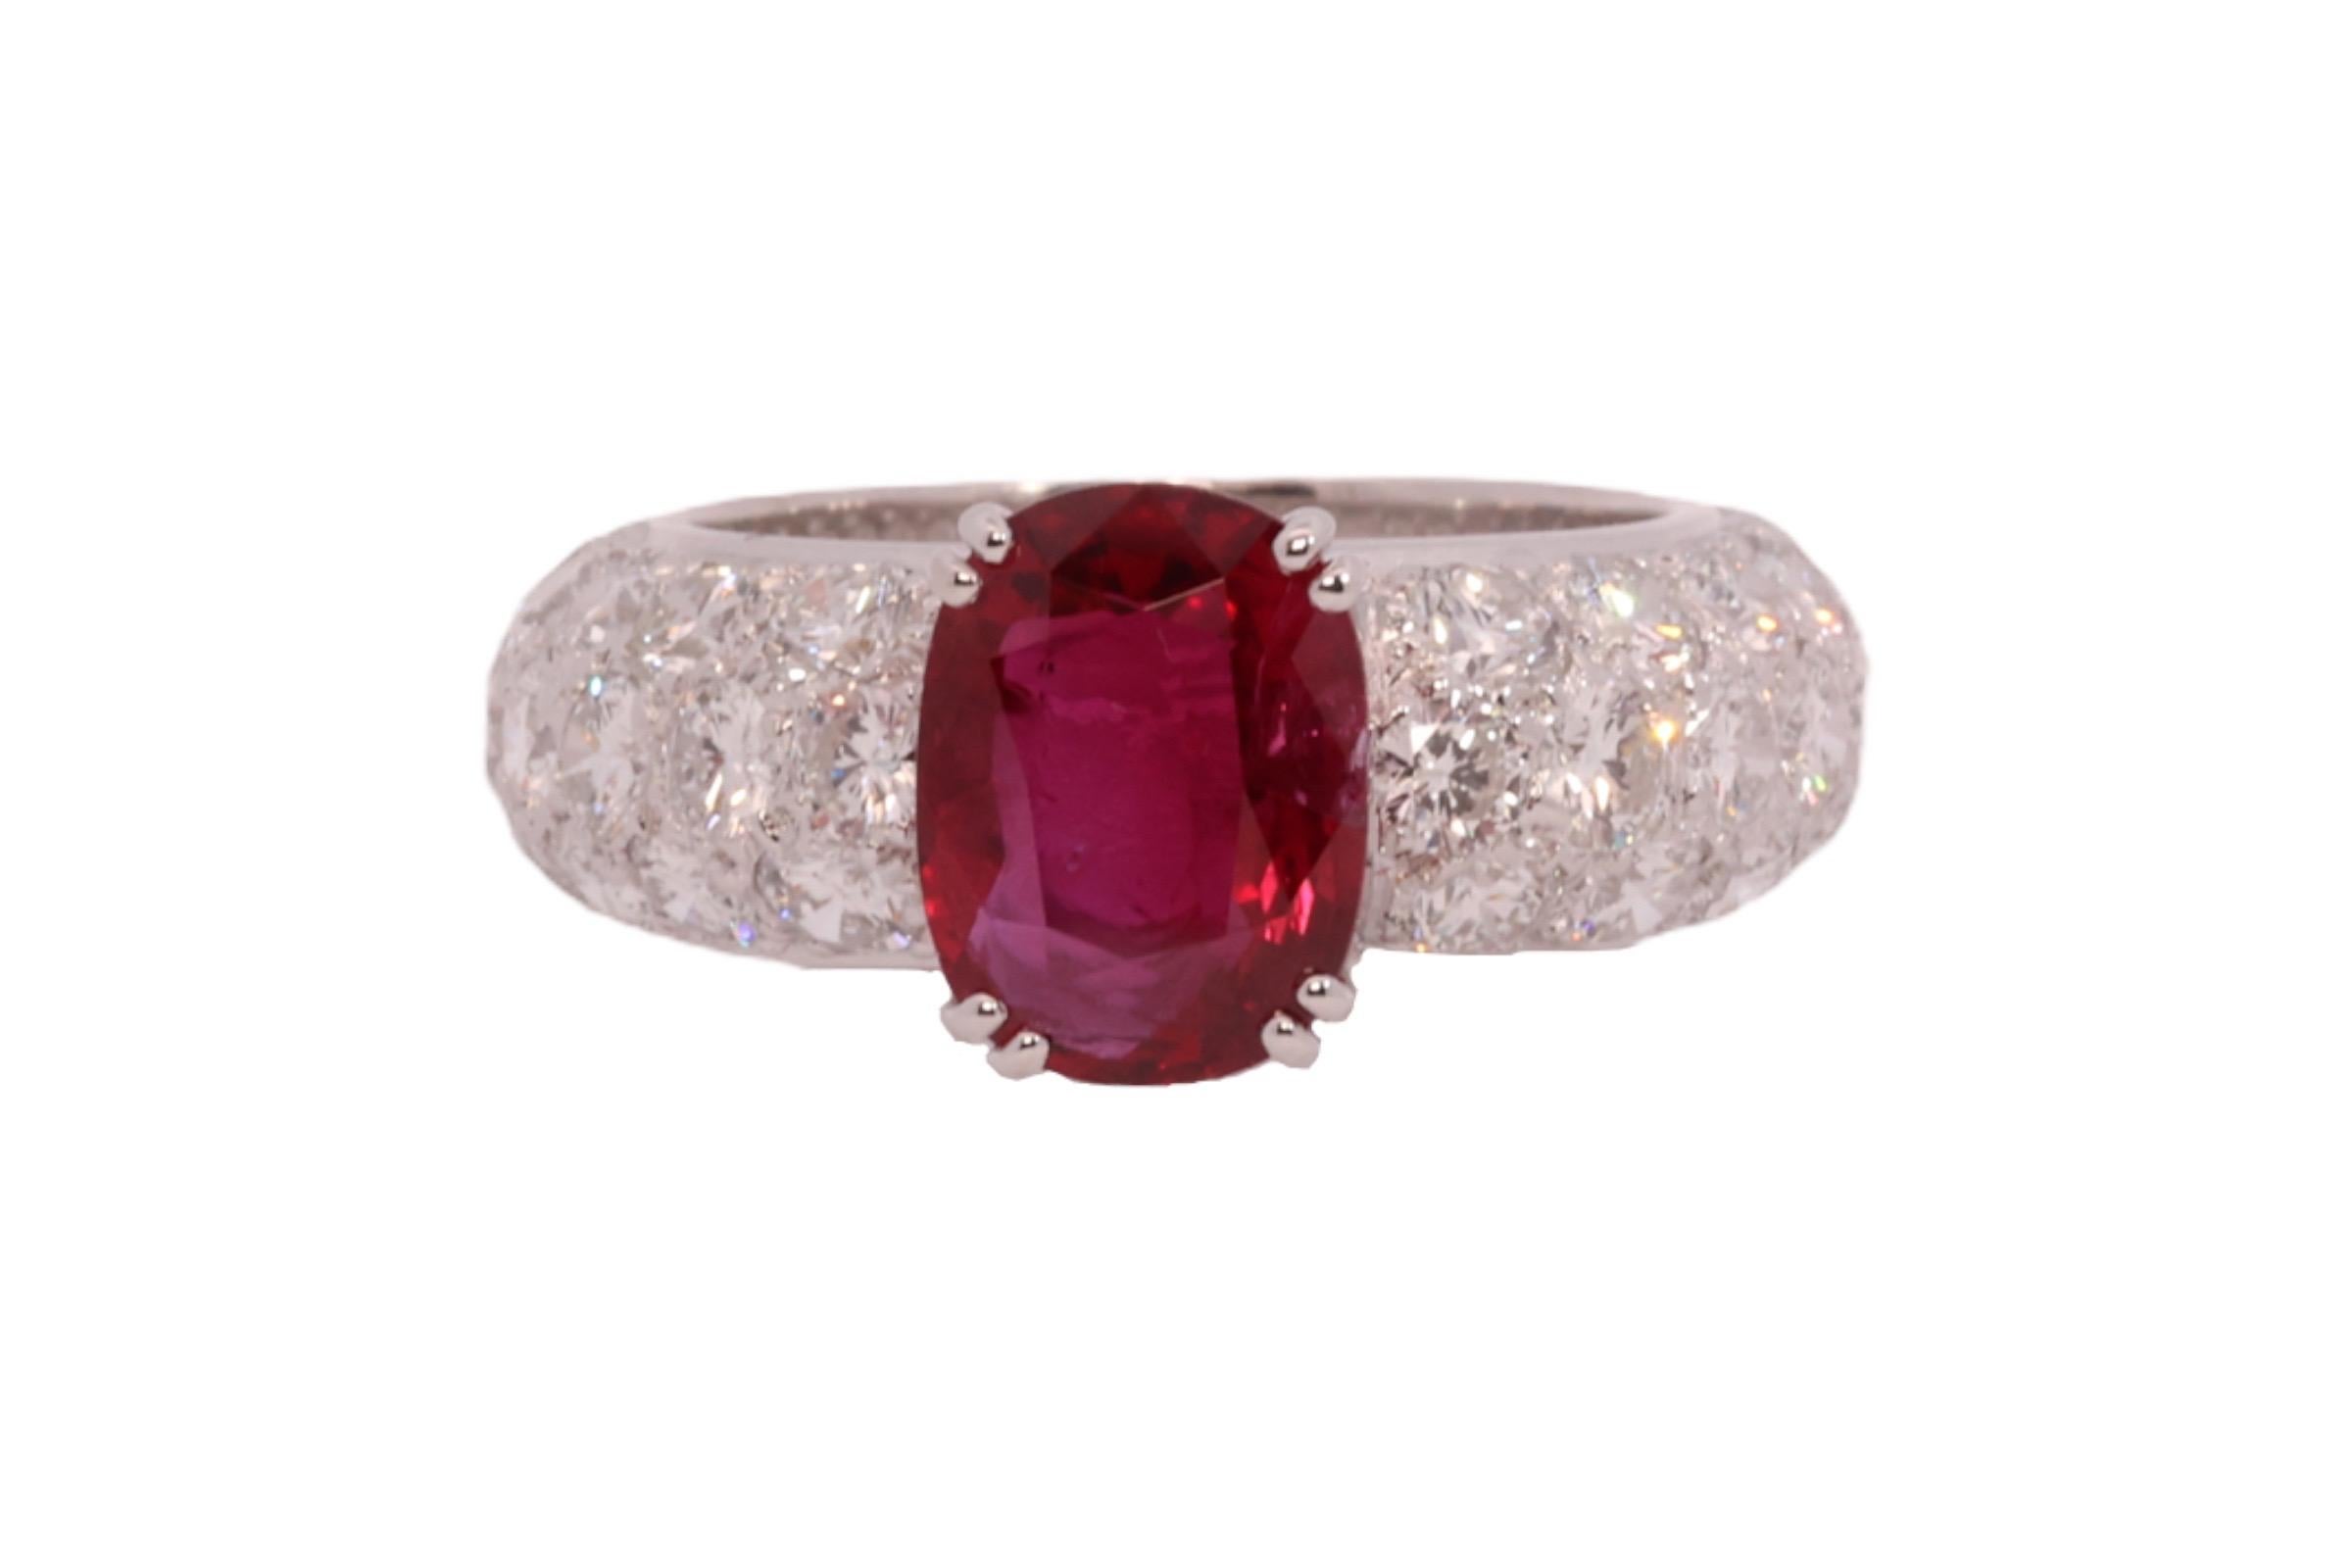 Magnificent 18kt White Gold Eternity Ring with 5.58ct Diamonds 3.03 ct. Ruby with GRS Certificate

Ruby: Natural Siam Ruby, 3.03 ct., Brilliant cute, Oval shape, Vivid Red Comes with GRS certificate.

Diamonds: 62 brilliant cut diamonds, together